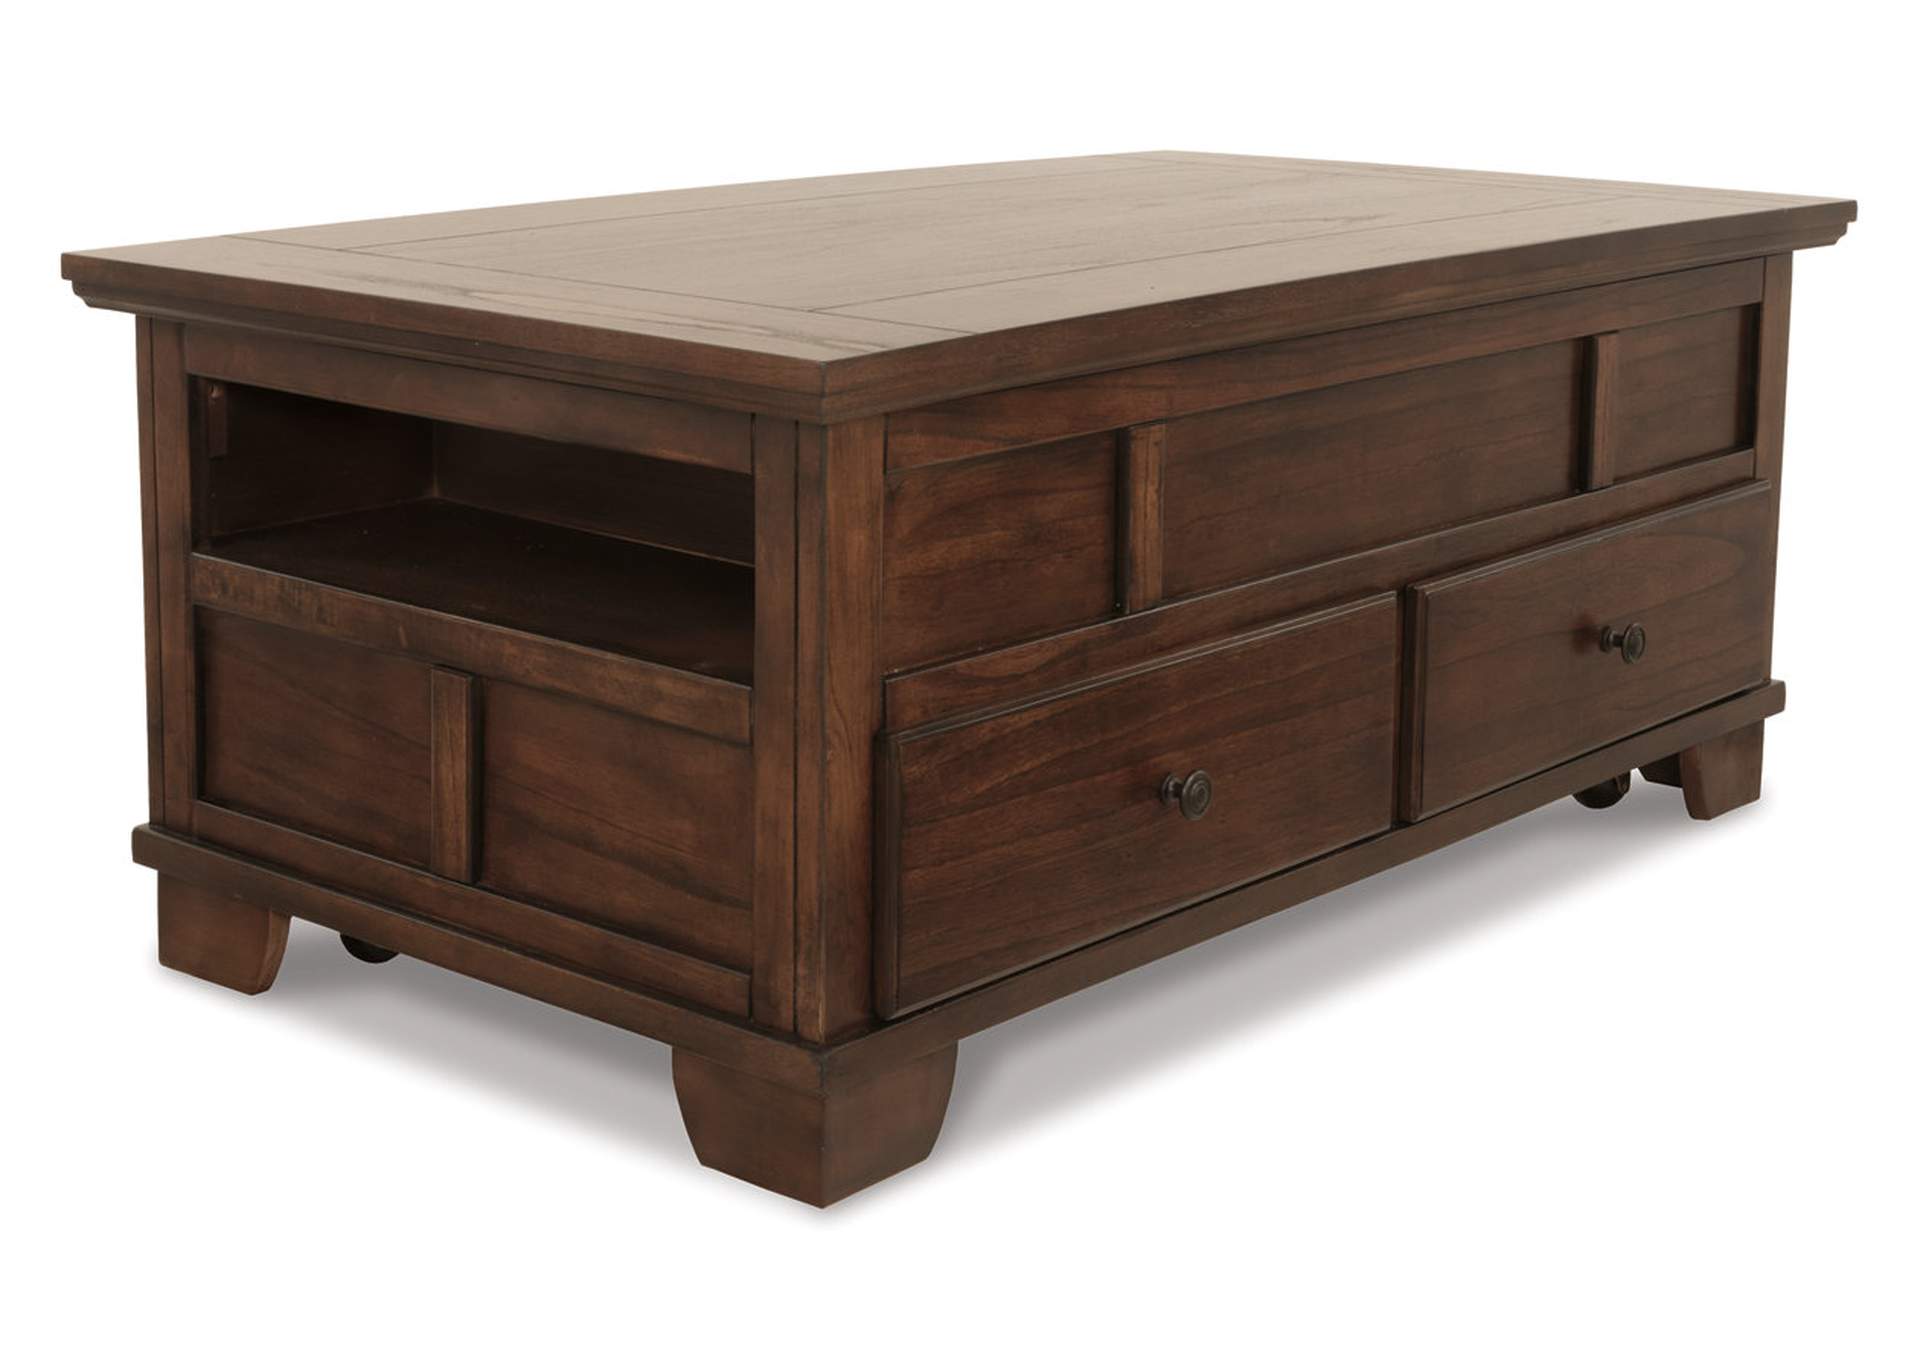 Gately Coffee Table with Lift Top,Signature Design By Ashley